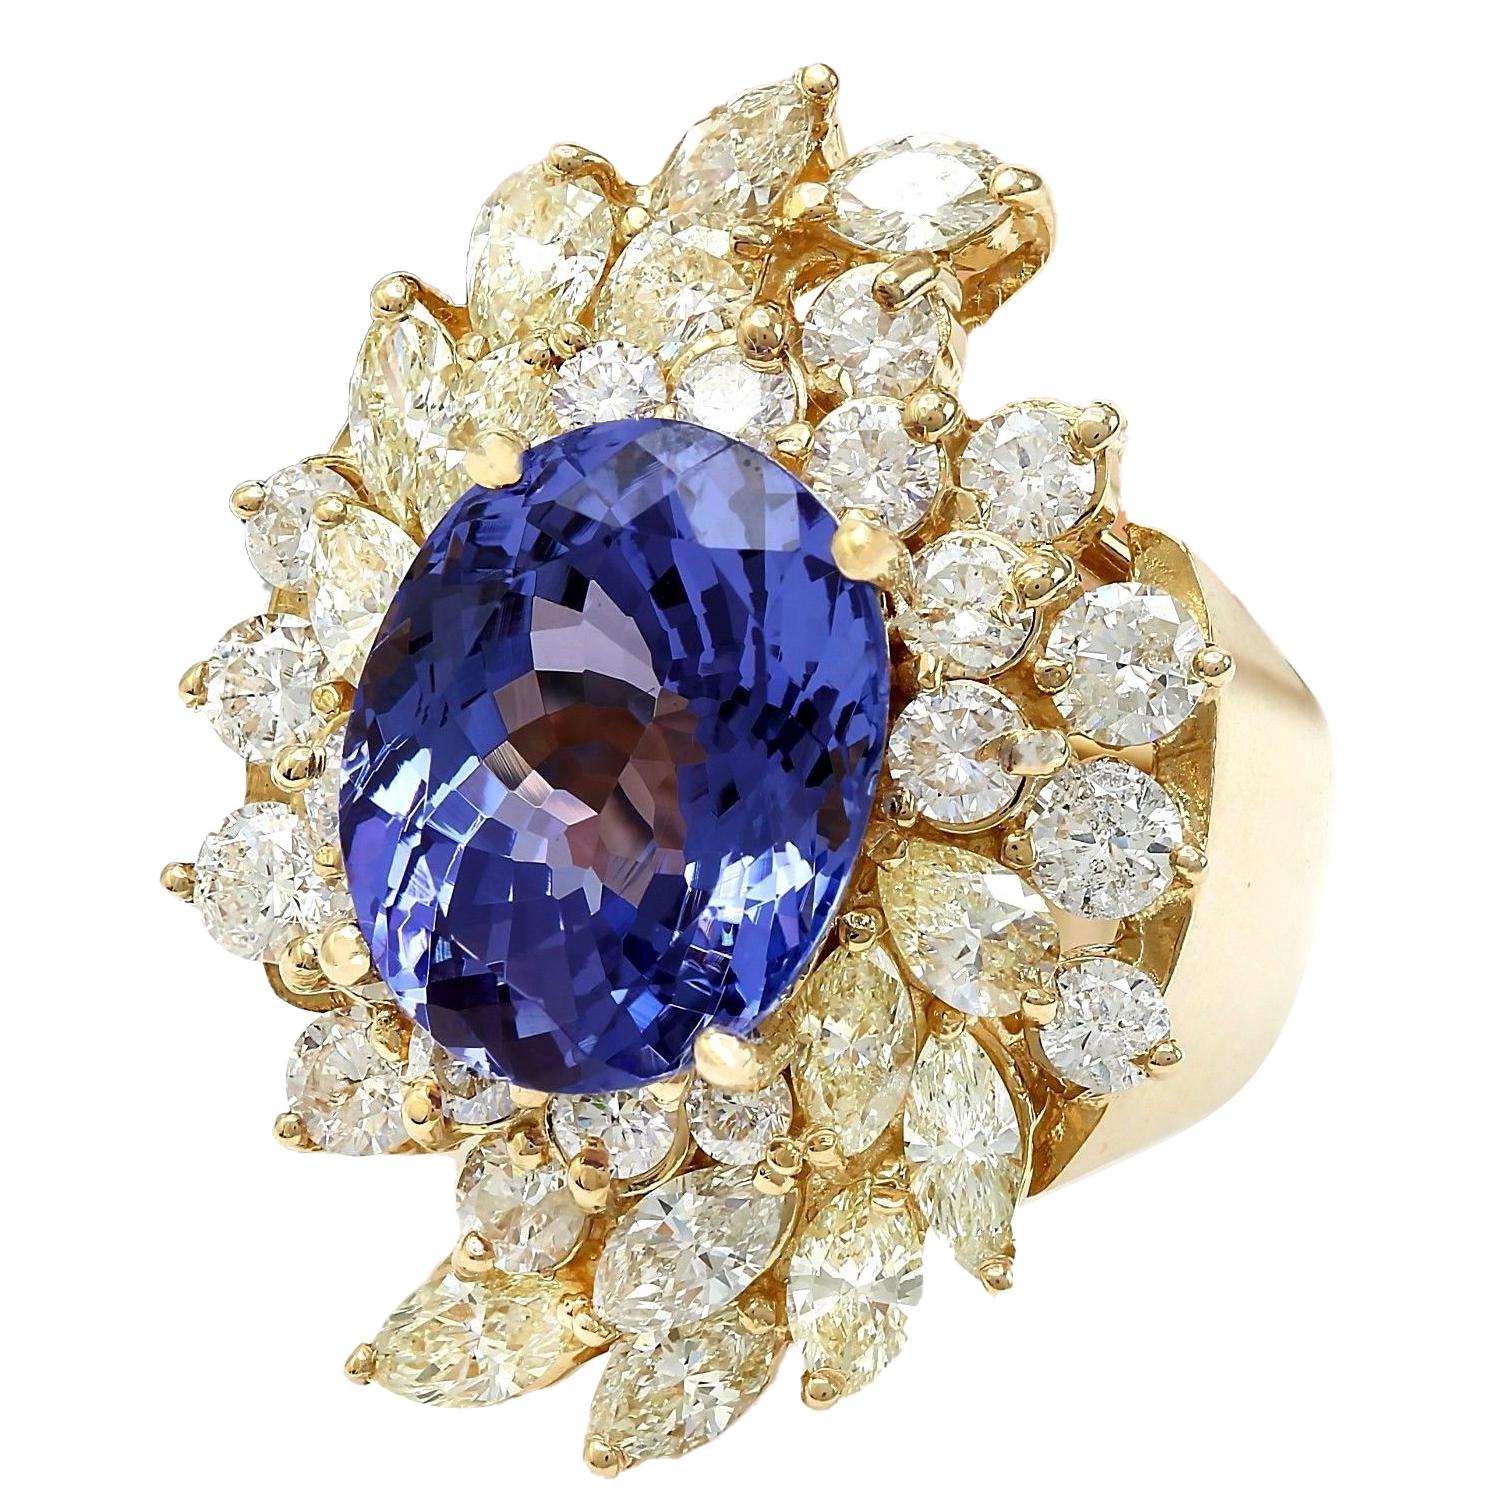 10.73 Carat Natural Tanzanite 14K Solid Yellow Gold Diamond Ring
 Item Type: Ring
 Item Style: Cocktail
 Material: 14K Yellow Gold
 Mainstone: Tanzanite
 Stone Color: Blue
 Stone Weight: 6.98 Carat
 Stone Shape: Oval
 Stone Quantity: 1
 Stone